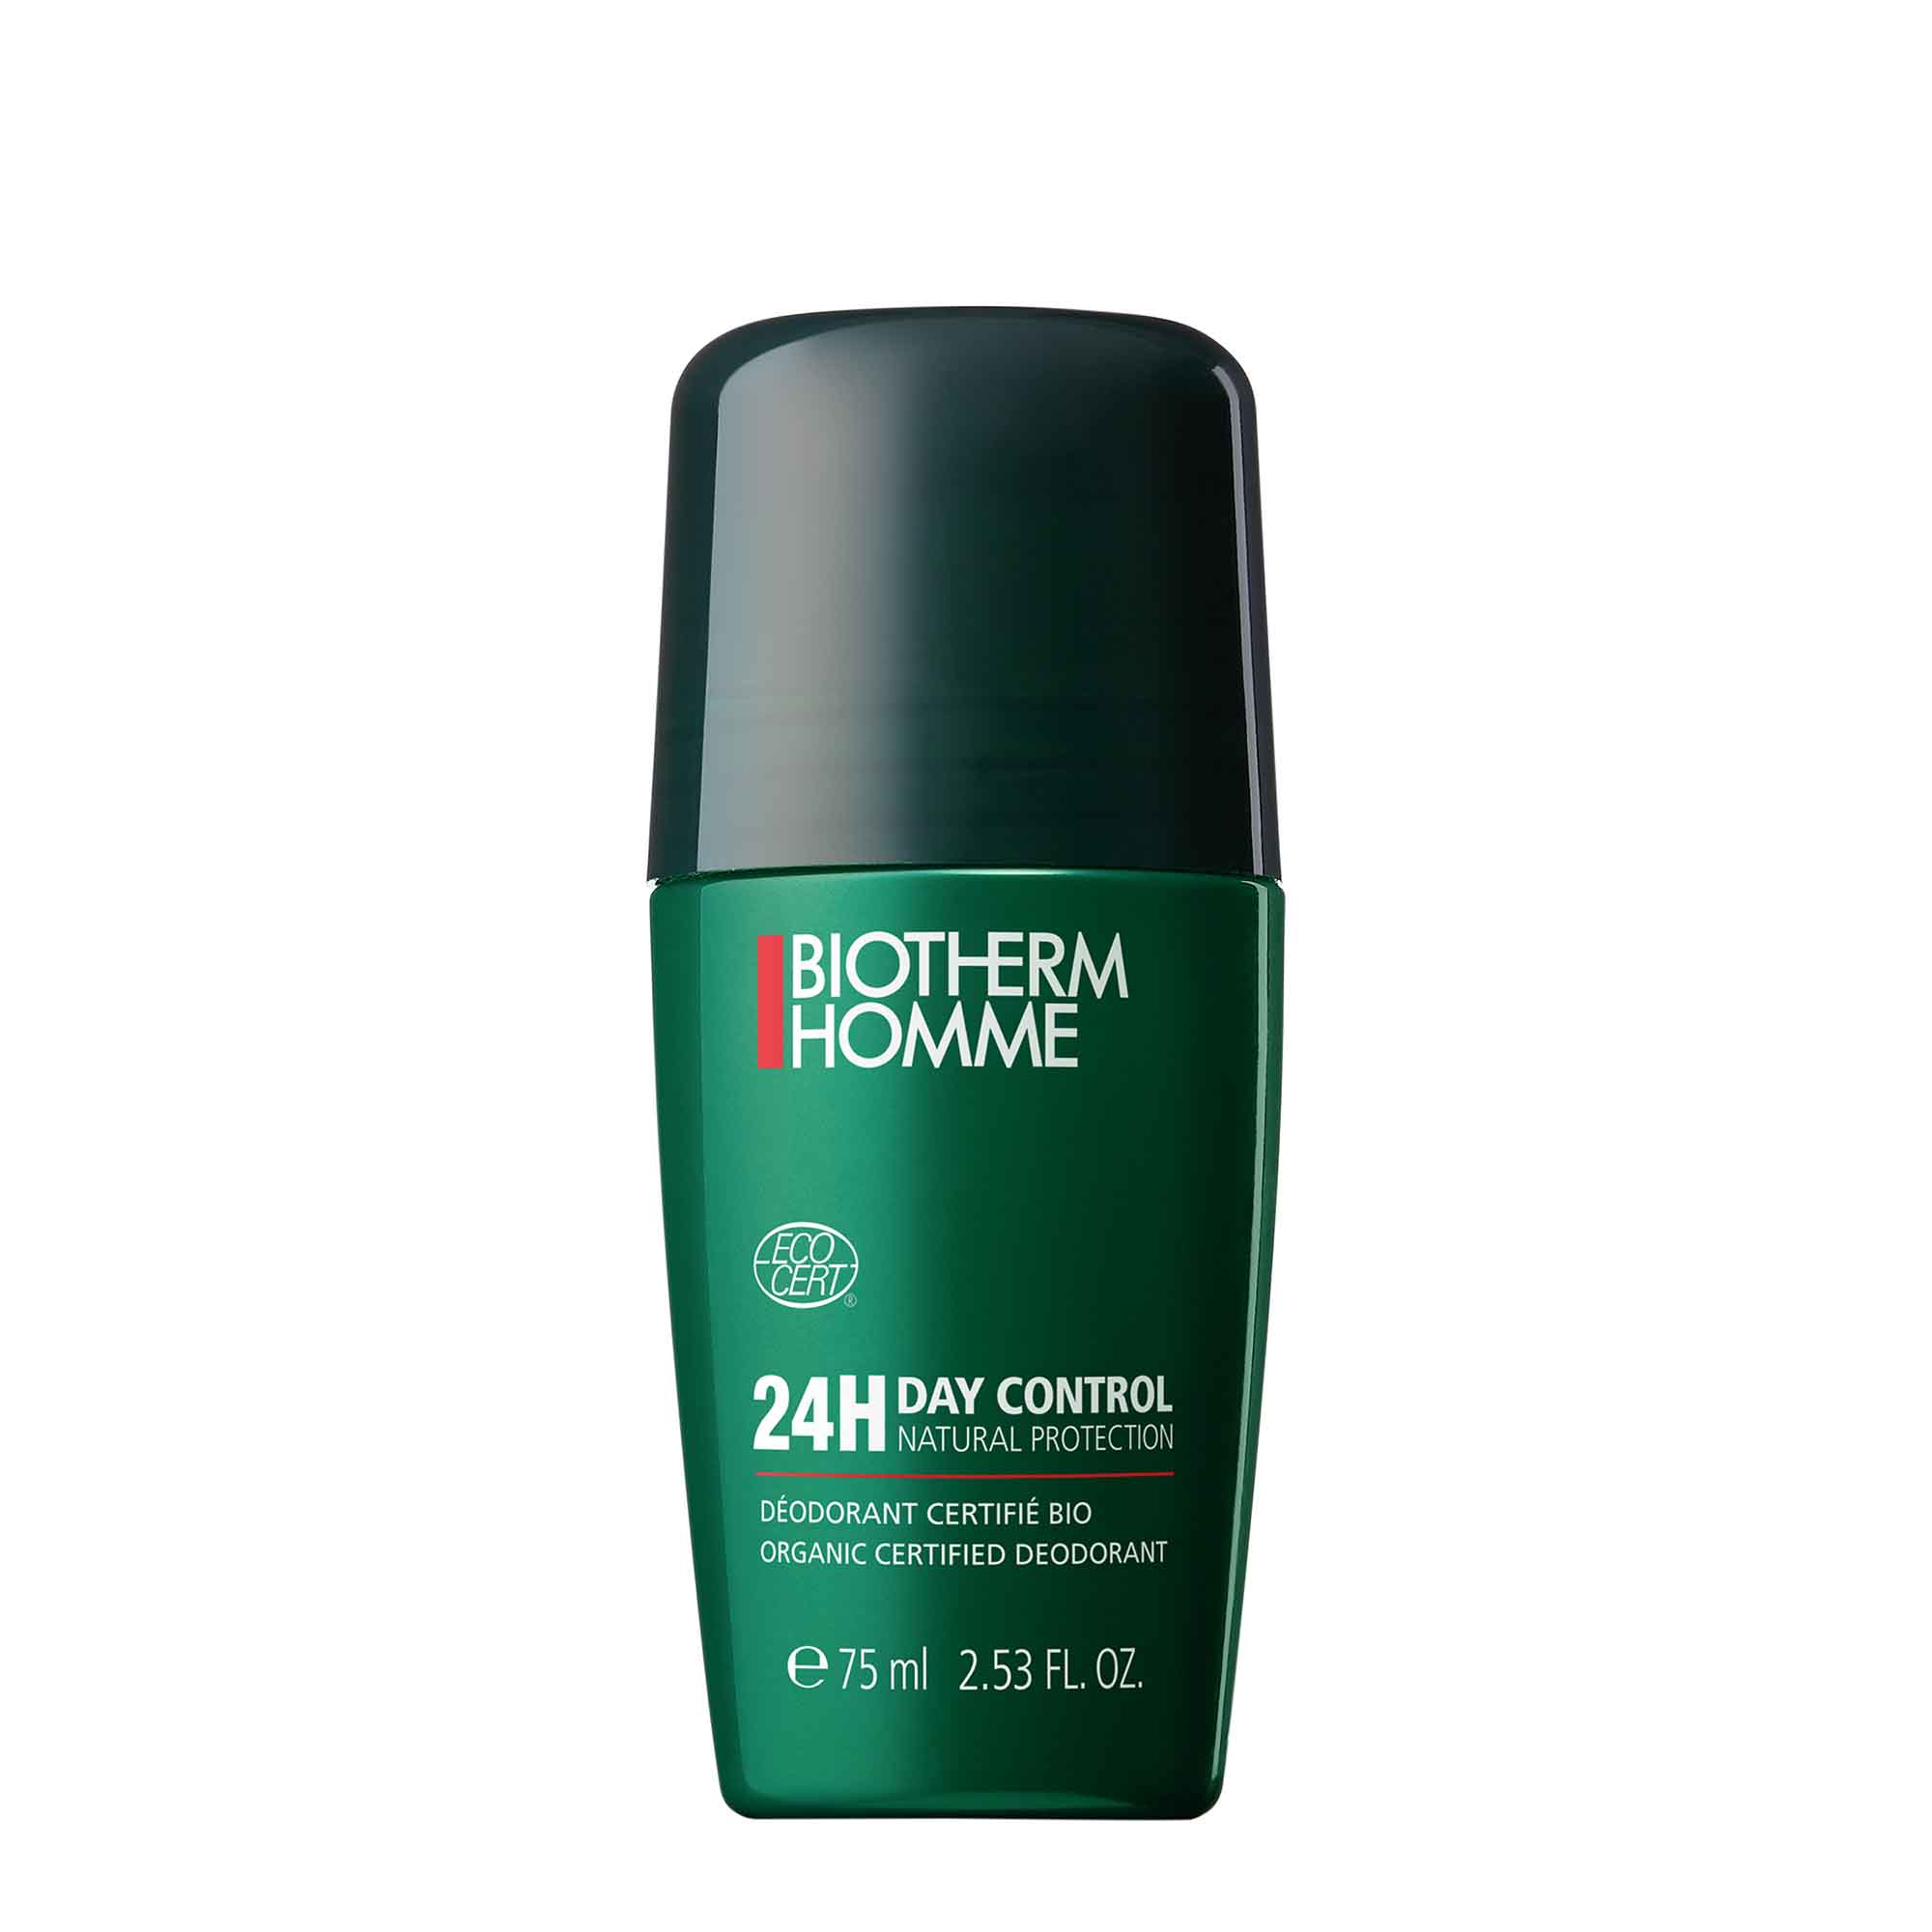 Day Control Natural Protect Deodorant Organic for men for Sensitive Skin | Biotherm Homme